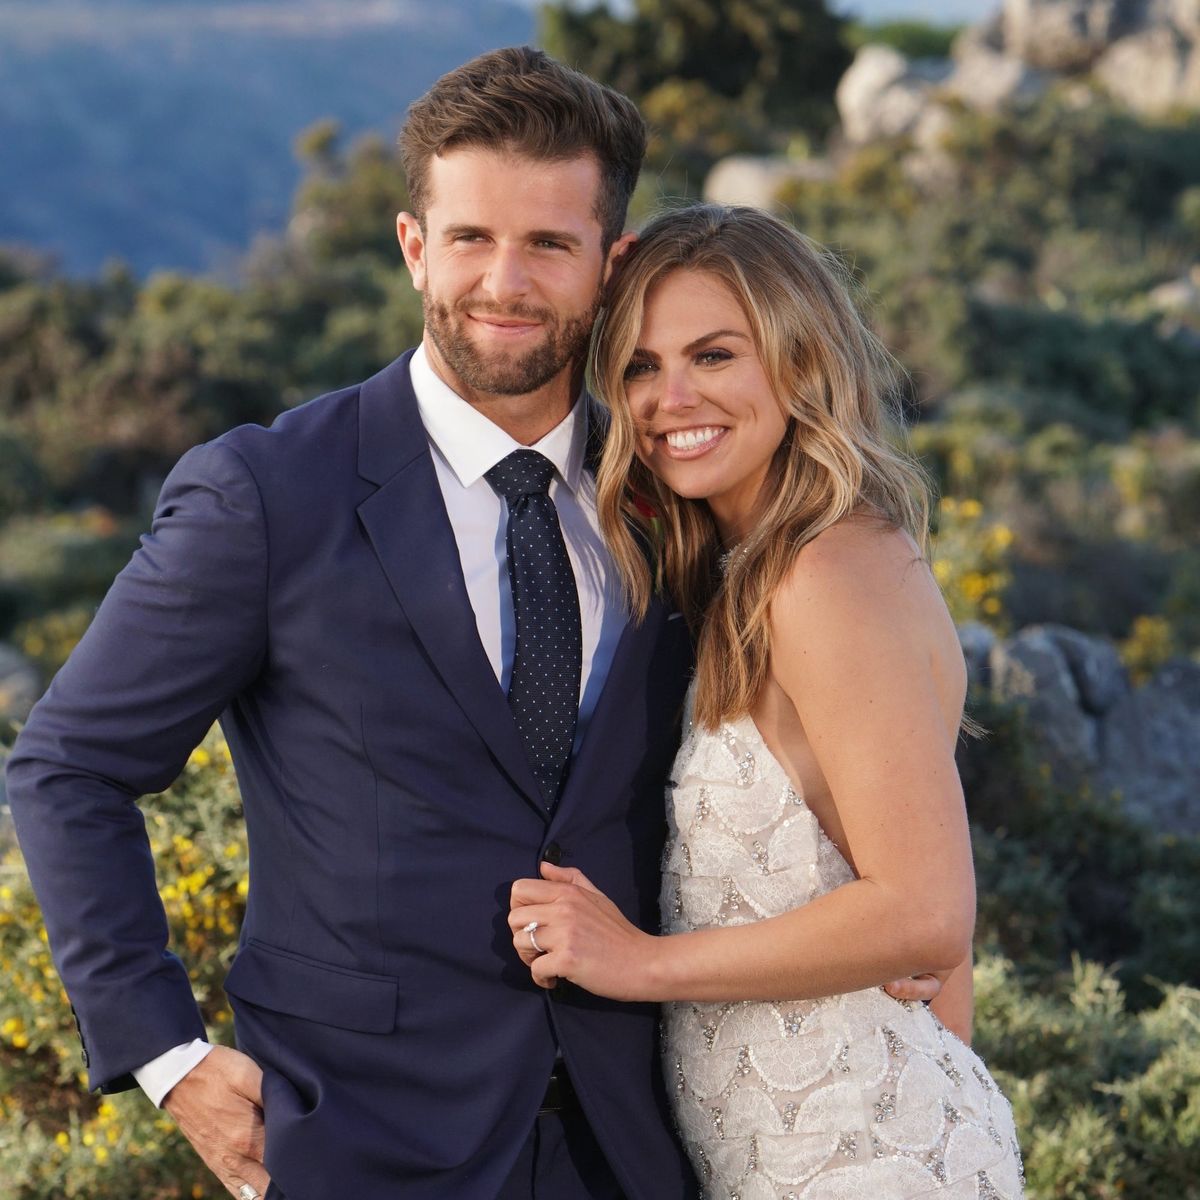 Engagement Rings on 'The Bachelor': Rules, and Breakups